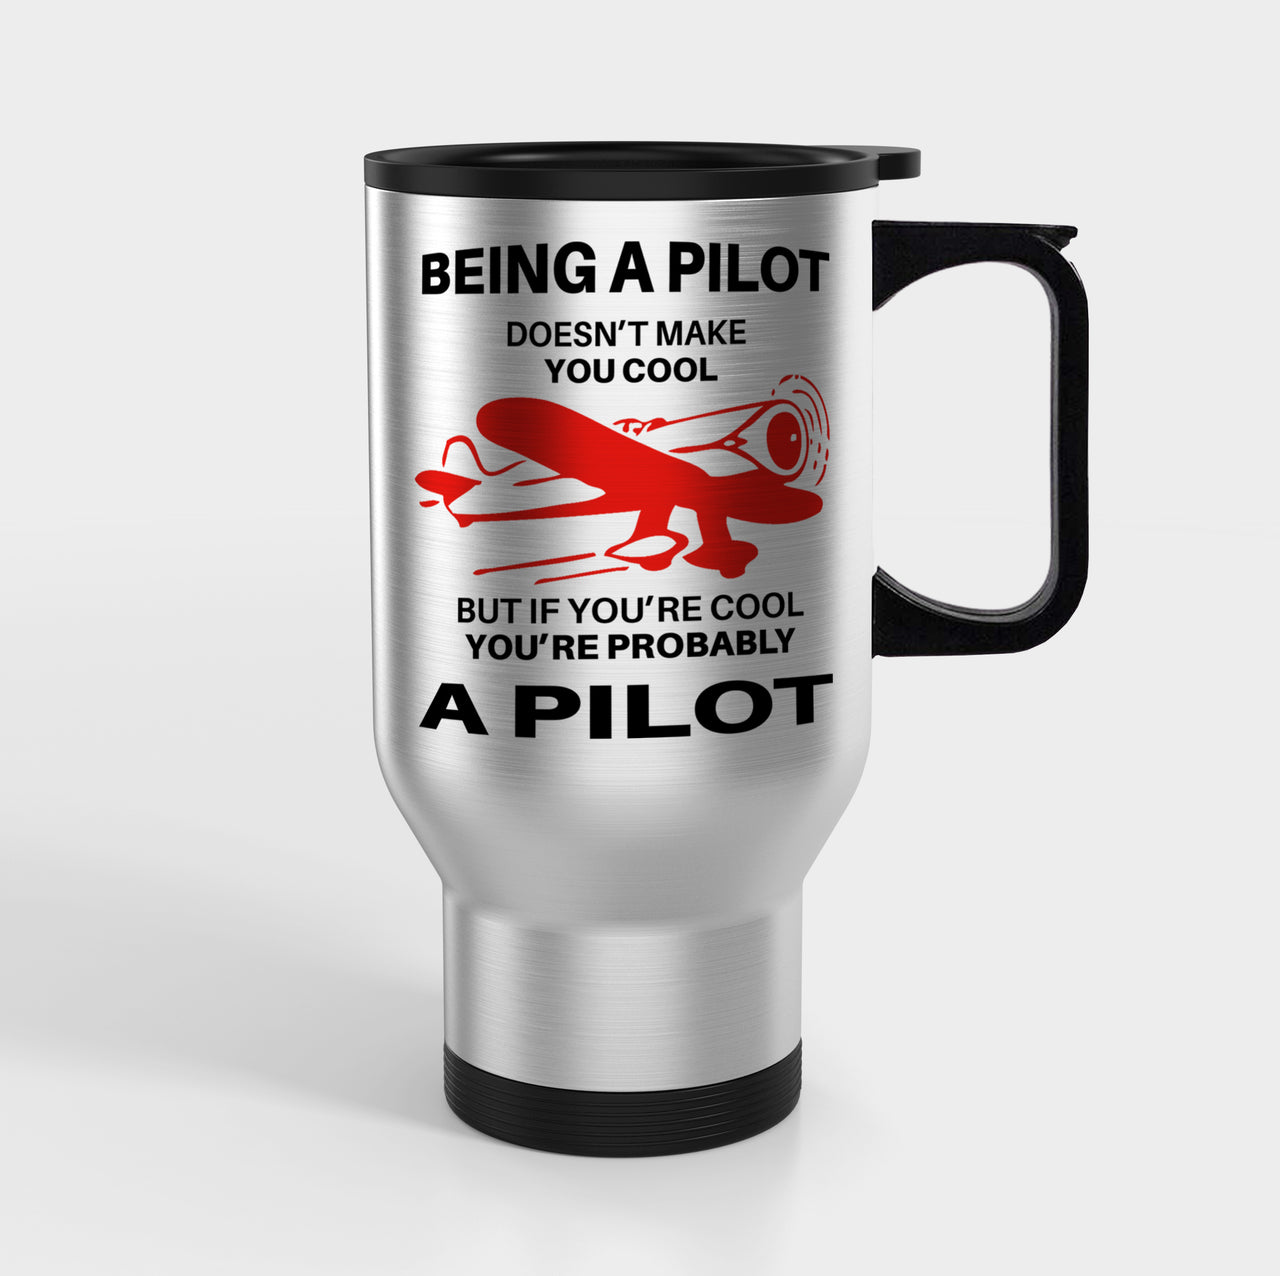 If You're Cool You're Probably a Pilot Designed Travel Mugs (With Holder)